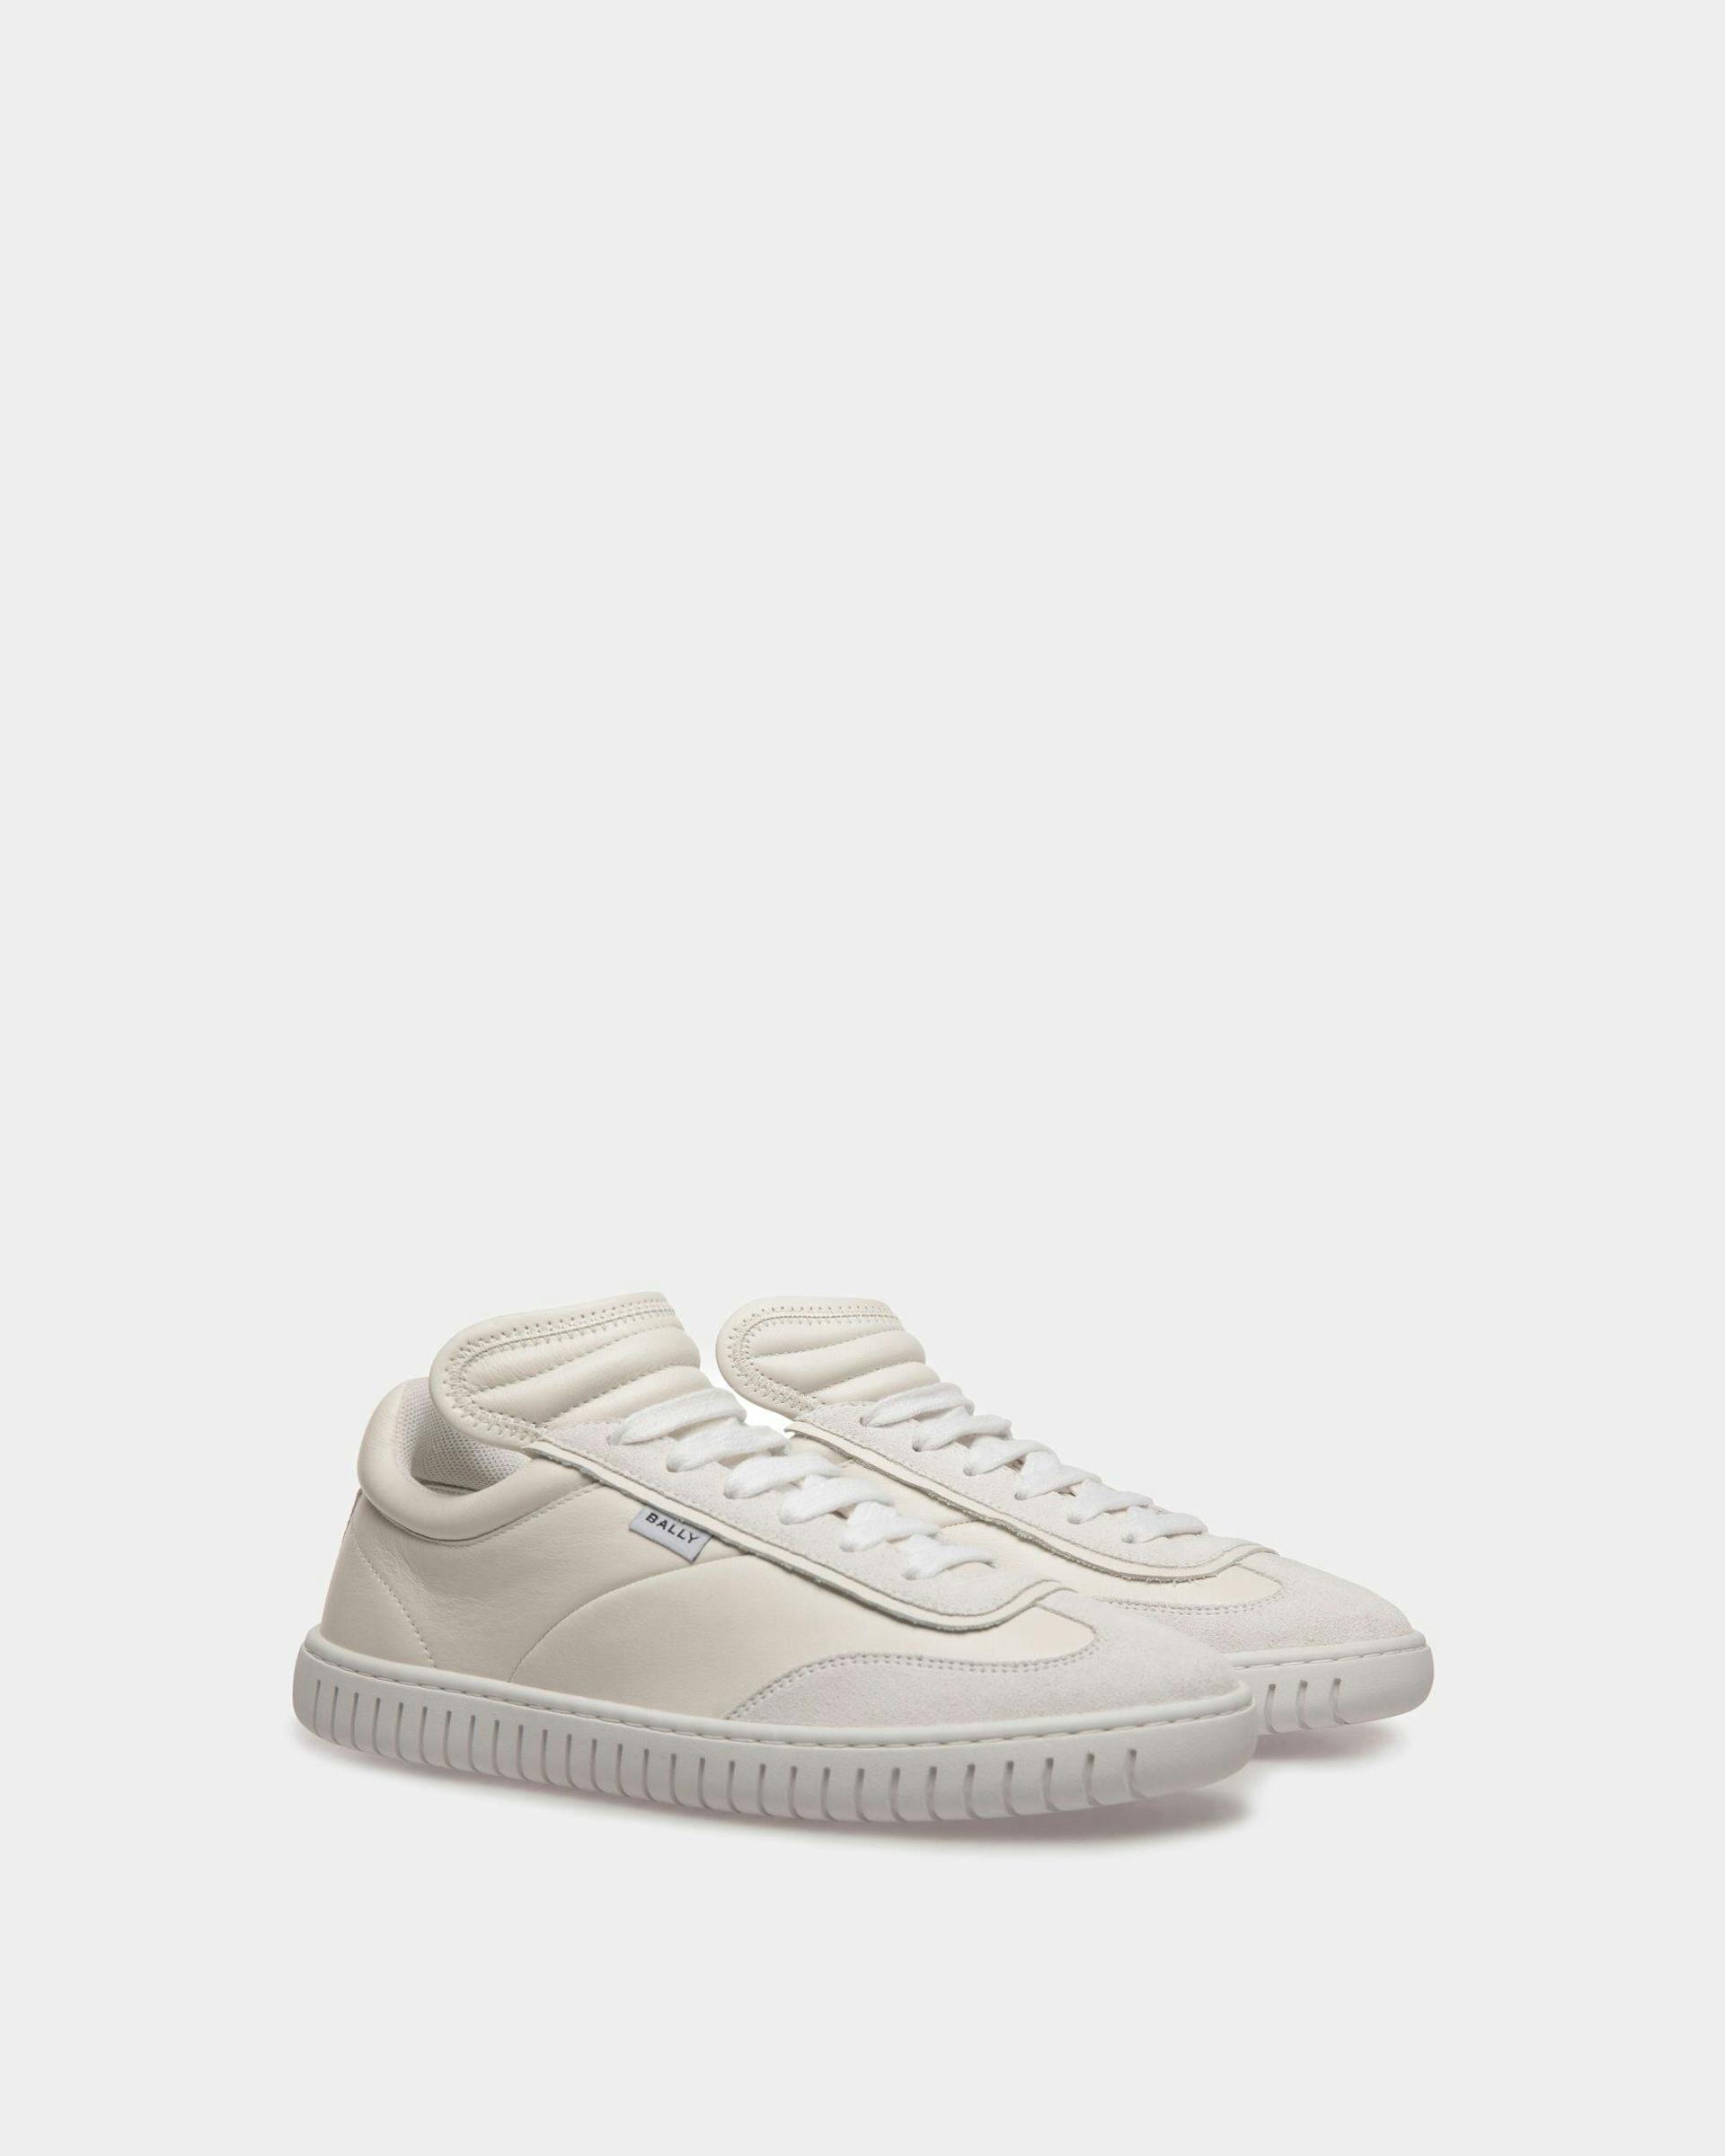 Player Sneakers In White Leather - Women's - Bally - 03